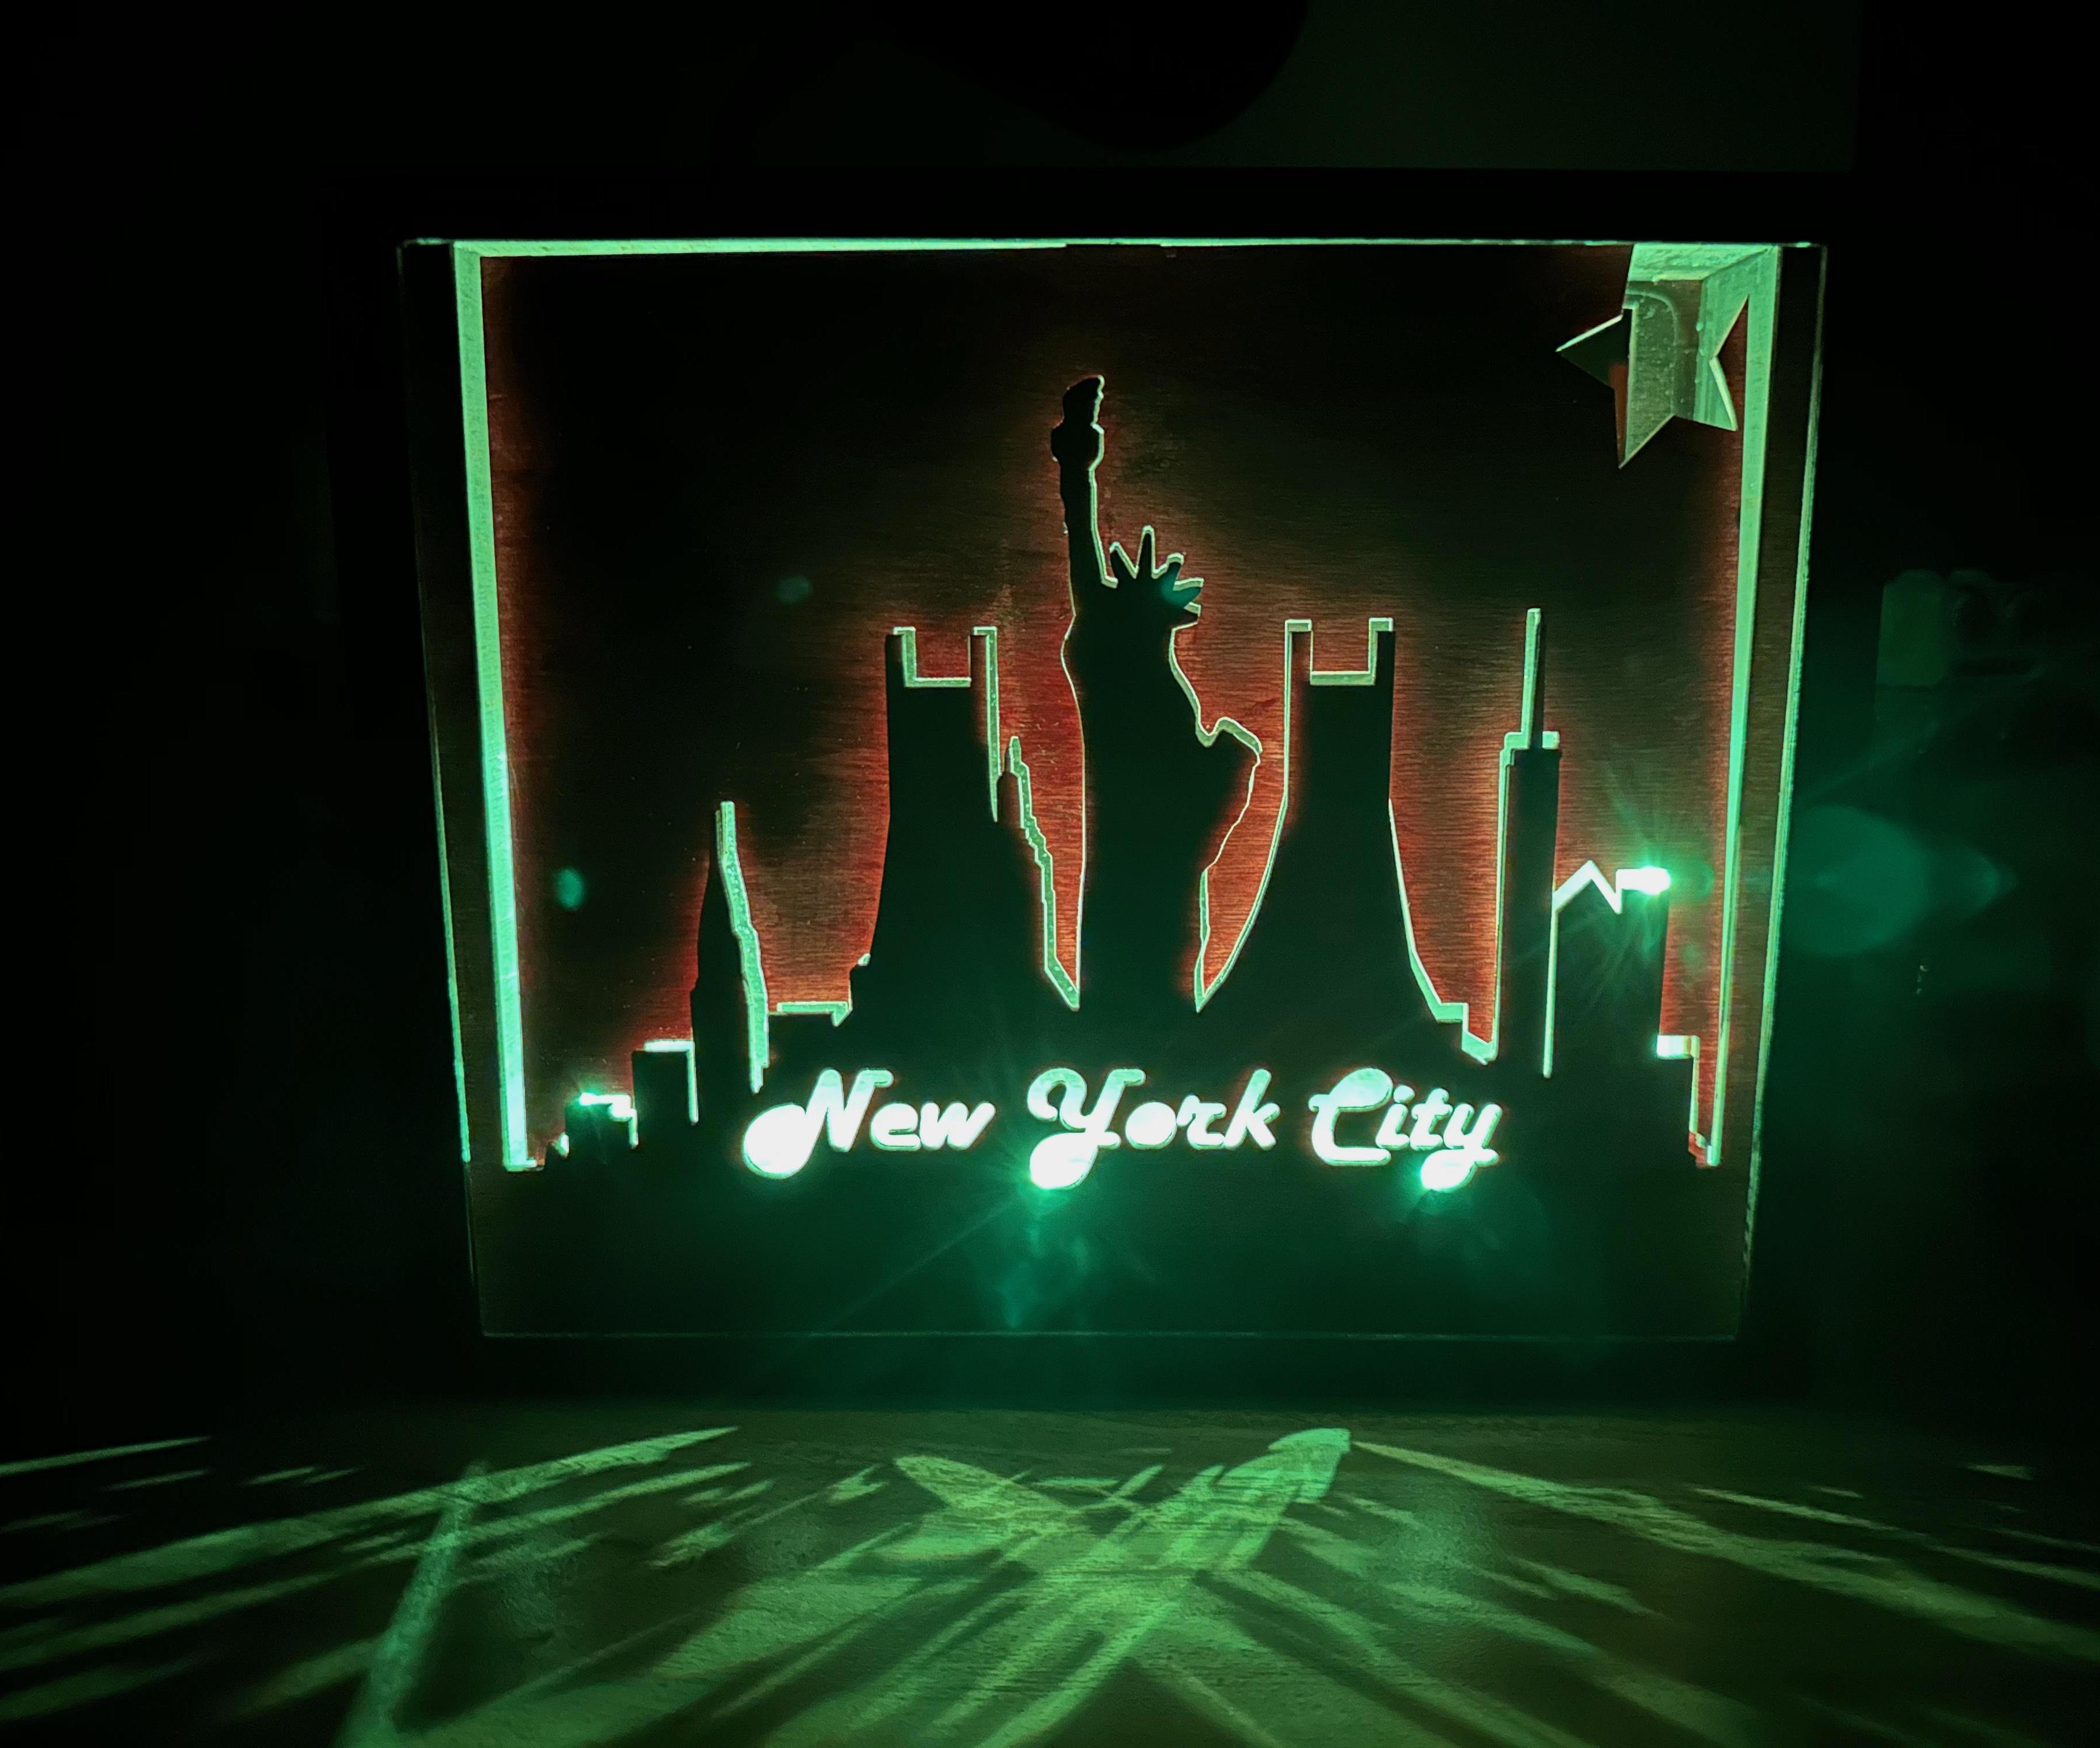 Backlit NYC Skyline With Bluetooth-Controlled Light & Sound Display